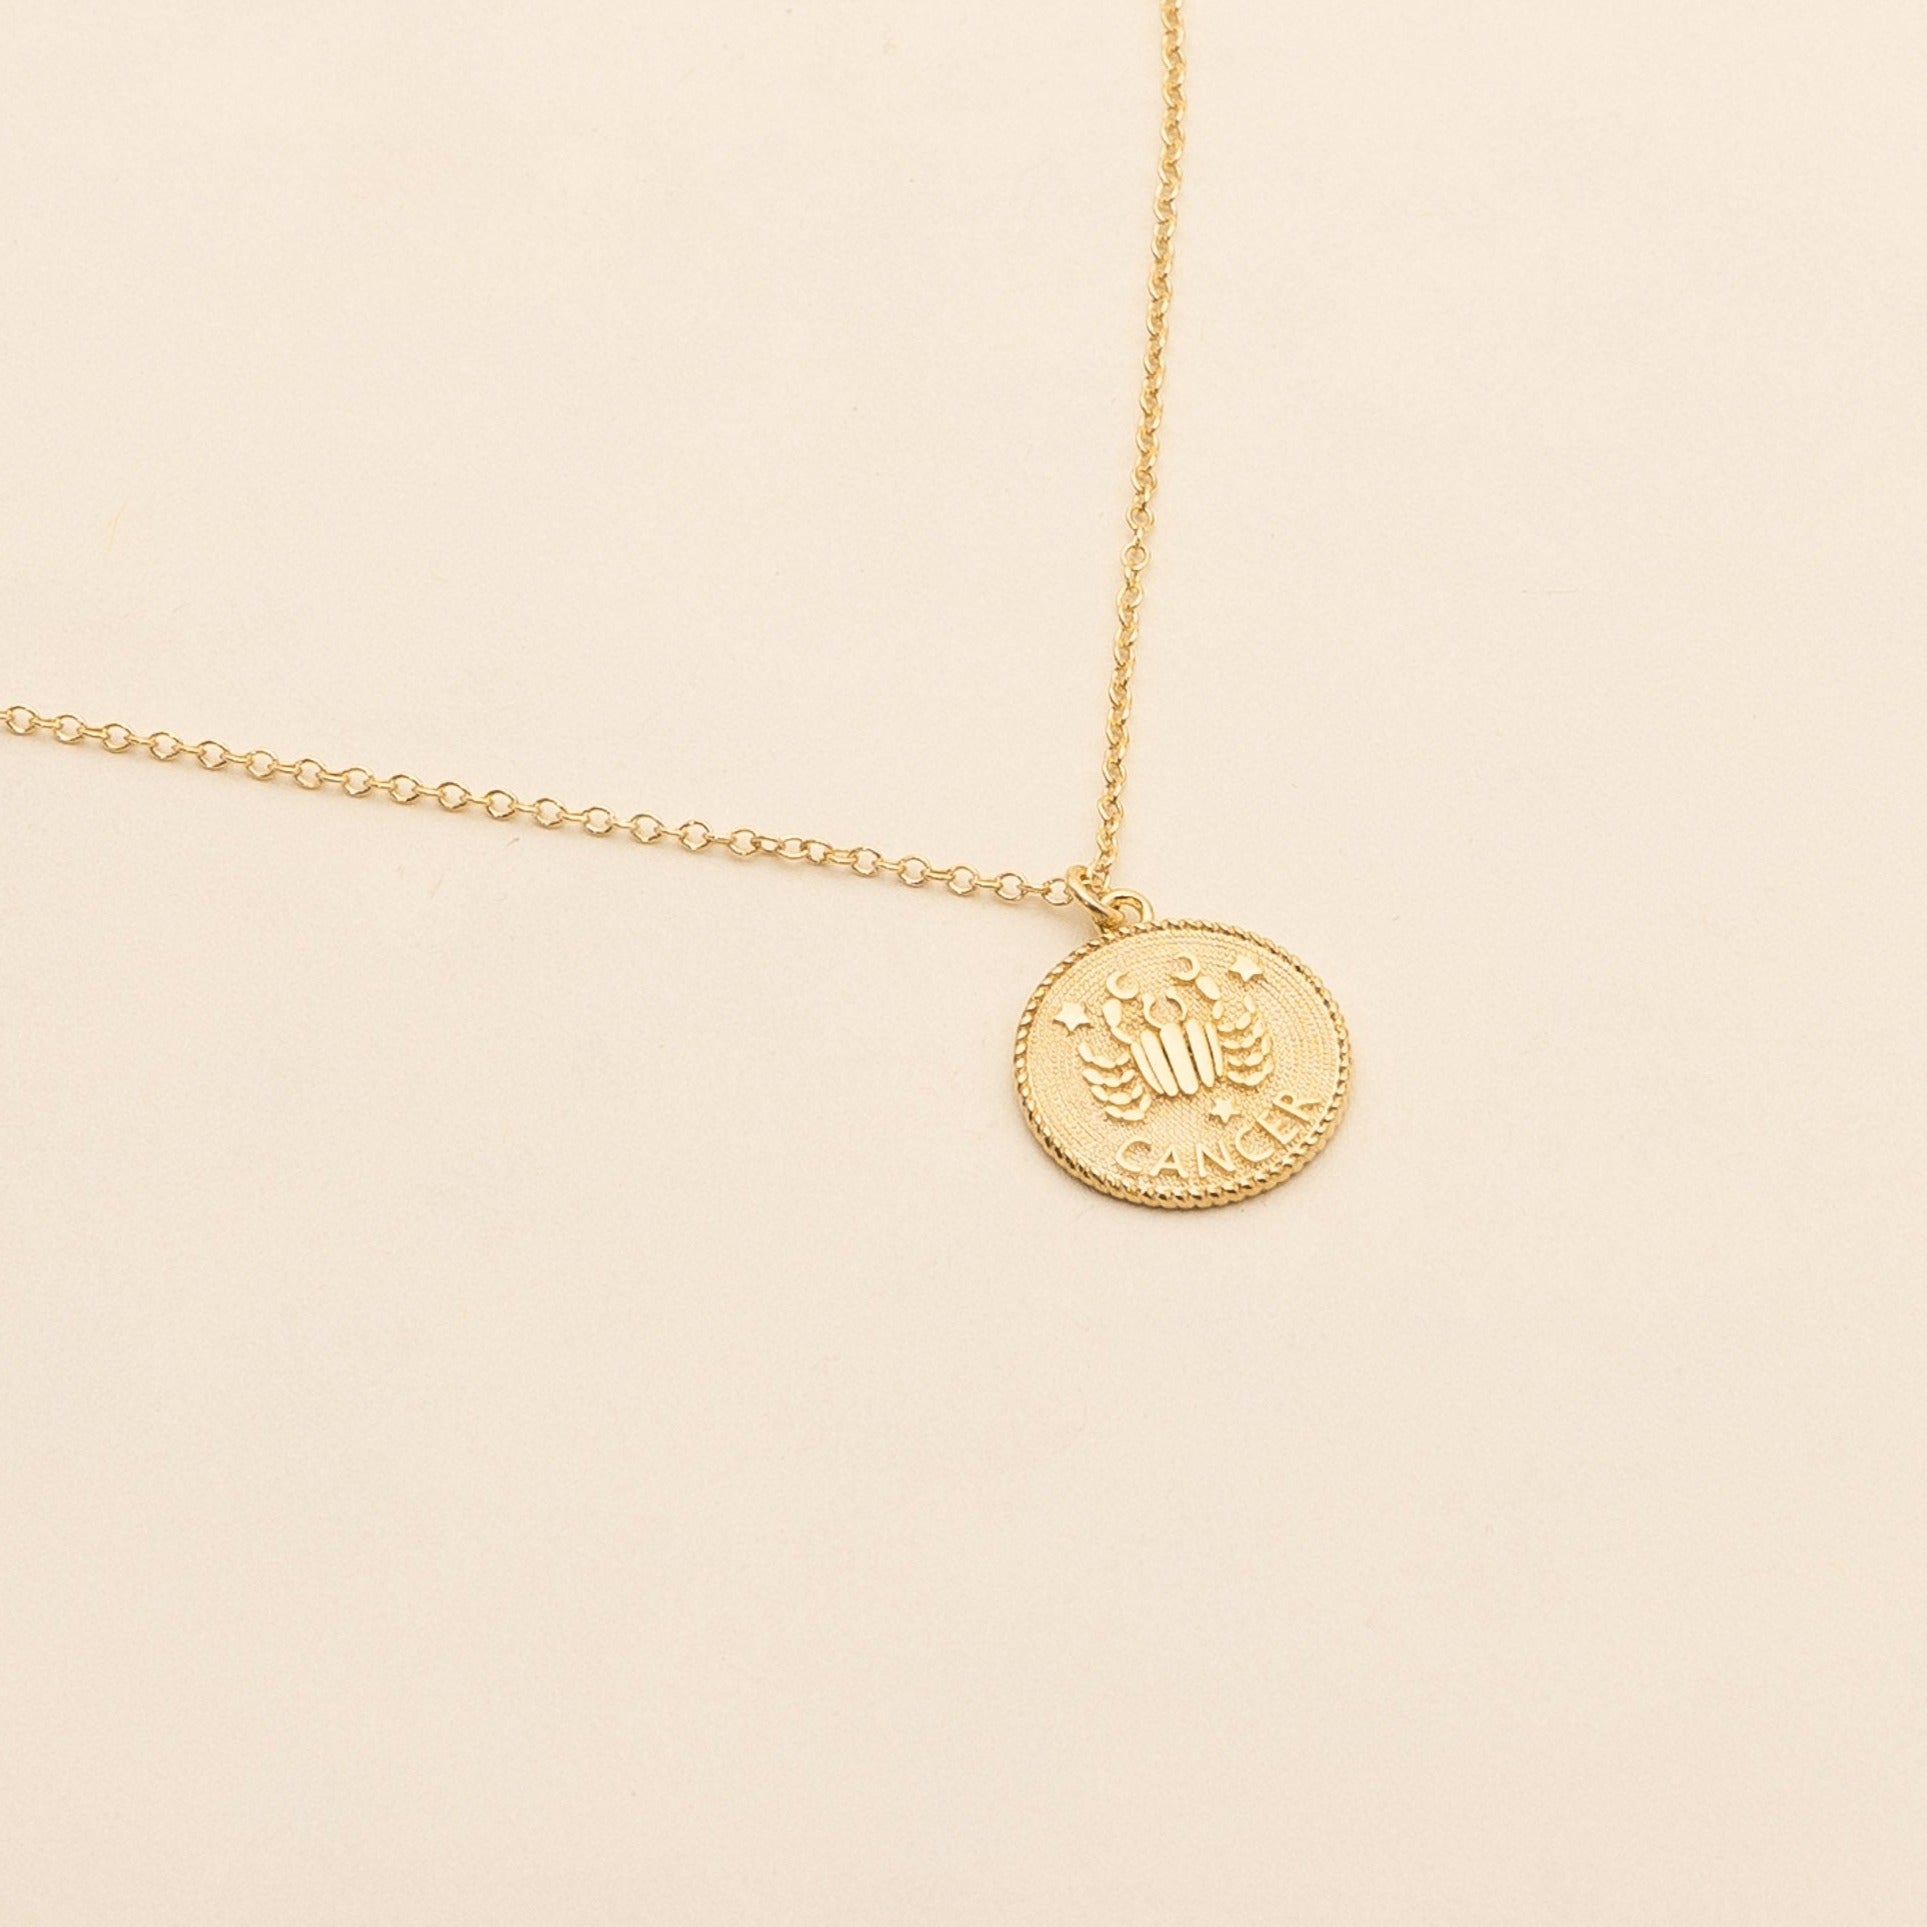 Cancer Zodiac Necklace_June 21-July 22_Katie Dean Jewelry_horoscope sign_Zodiac Collection, dainty handmade necklaces by Katie Dean Jewelry